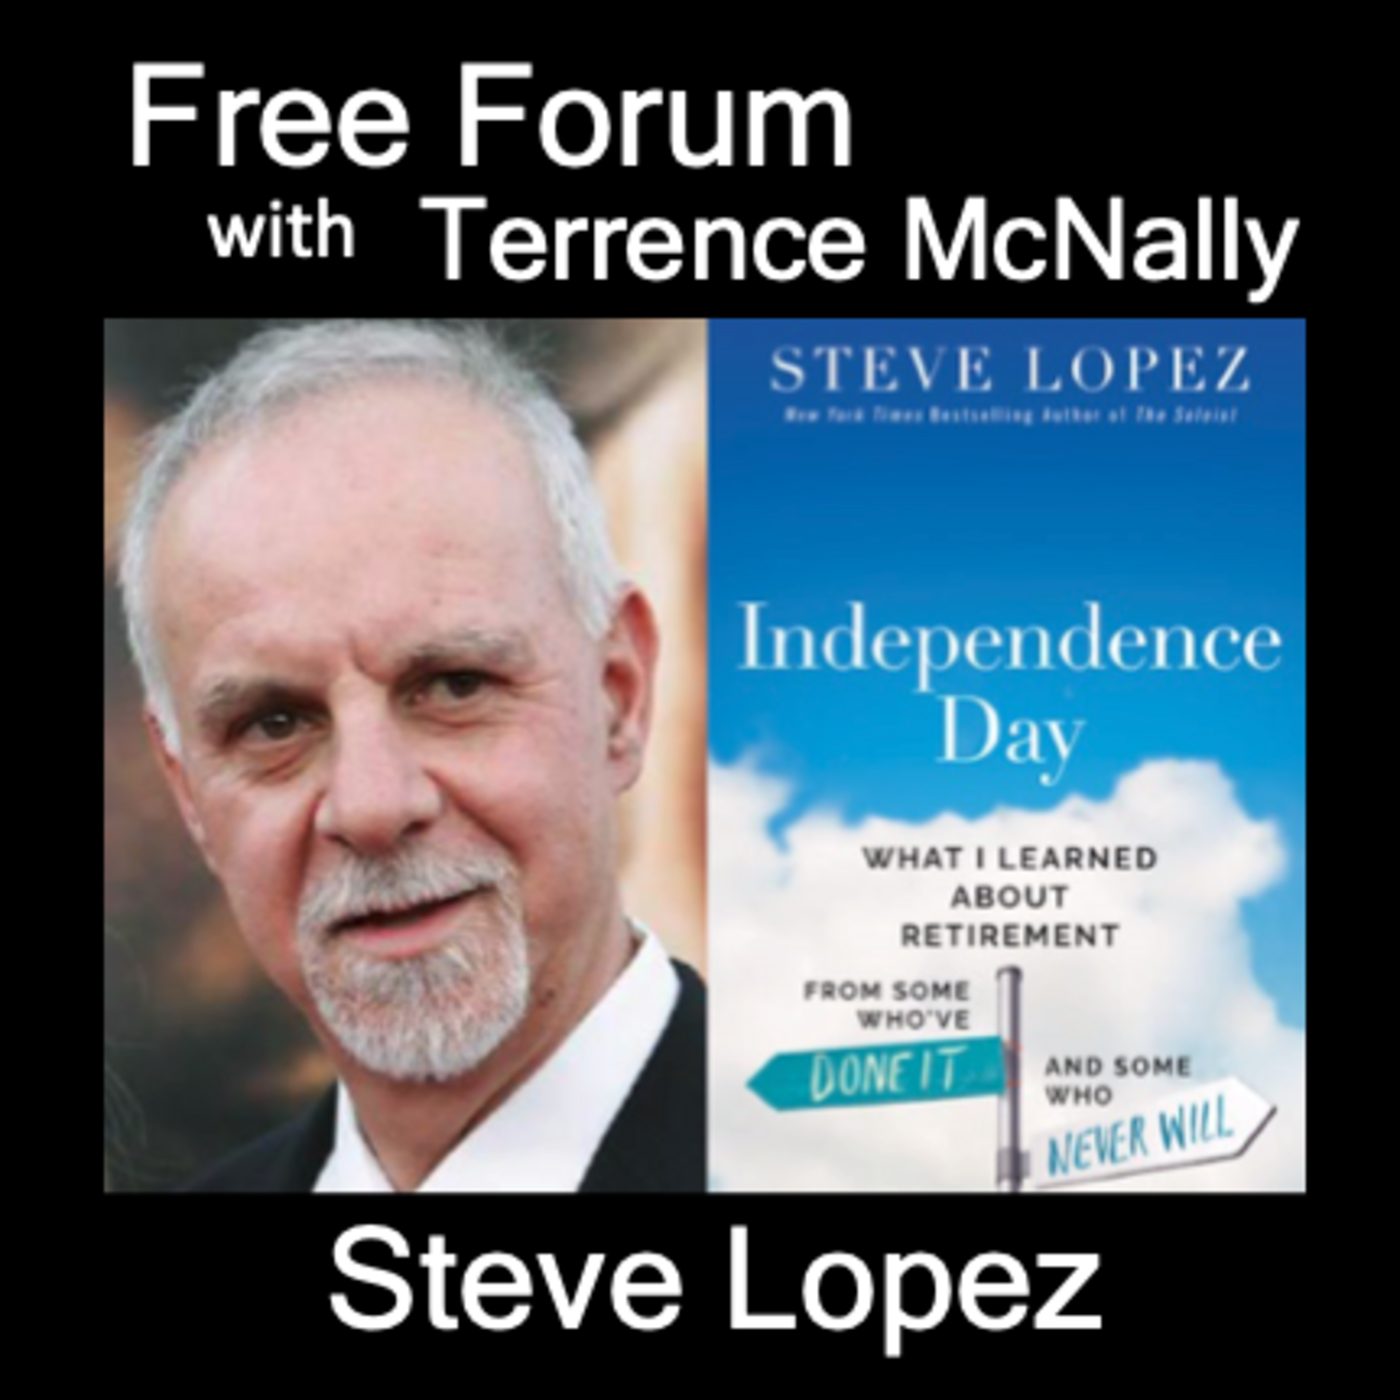 Episode 573: Is STEVE LOPEZ of the LATimes really thinking about retirement? - INDEPENDENCE DAY